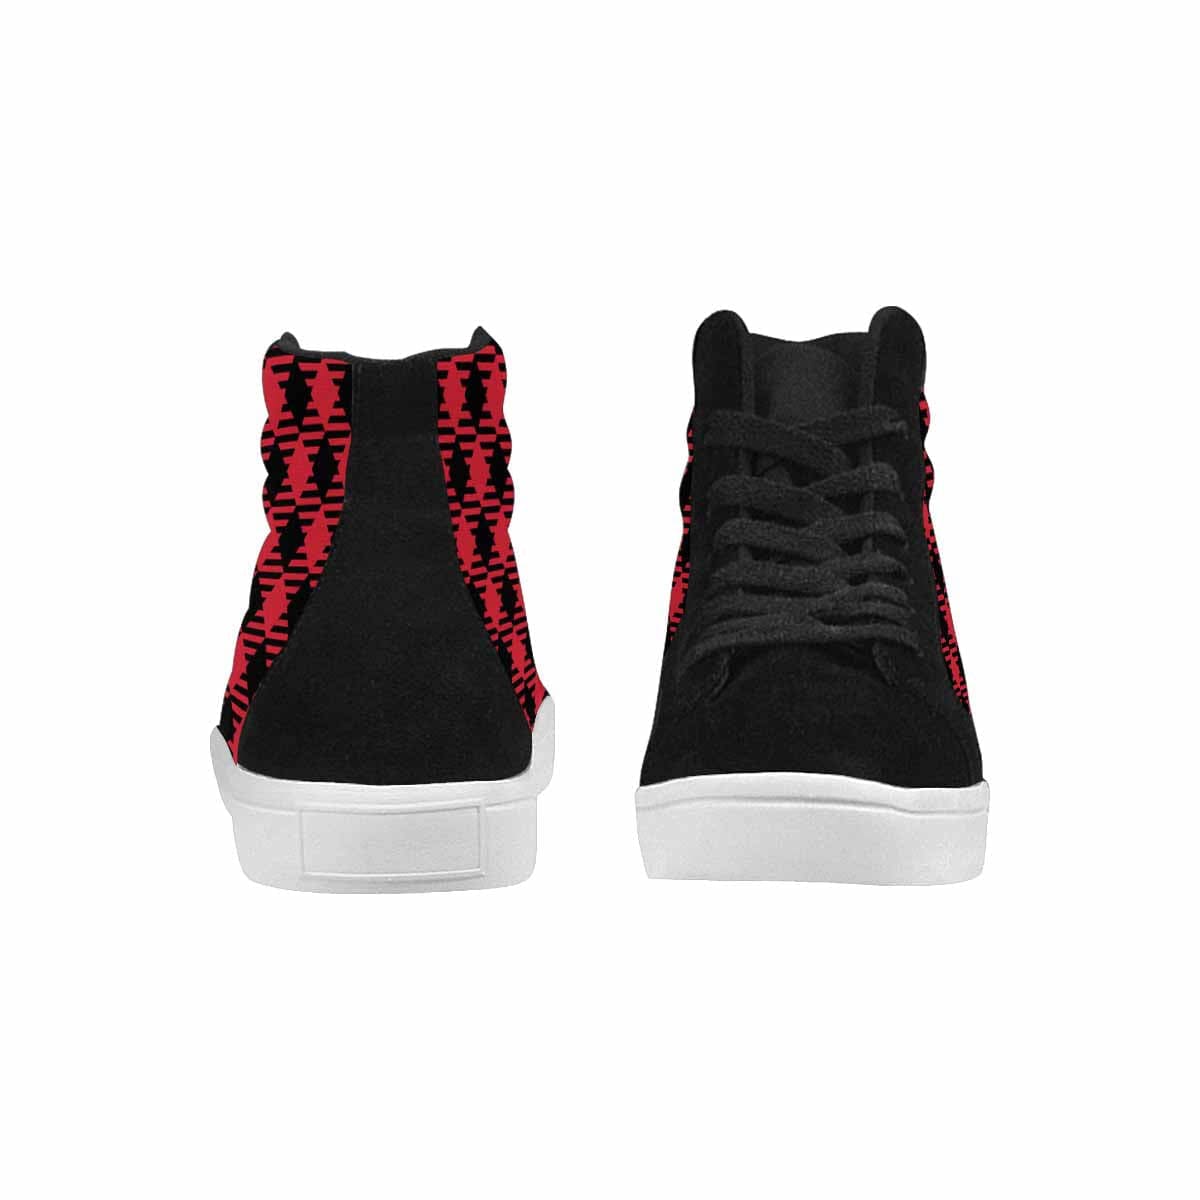 Sneakers For Women, Buffalo Plaid Red And Black - High Top Sports Shoes-2